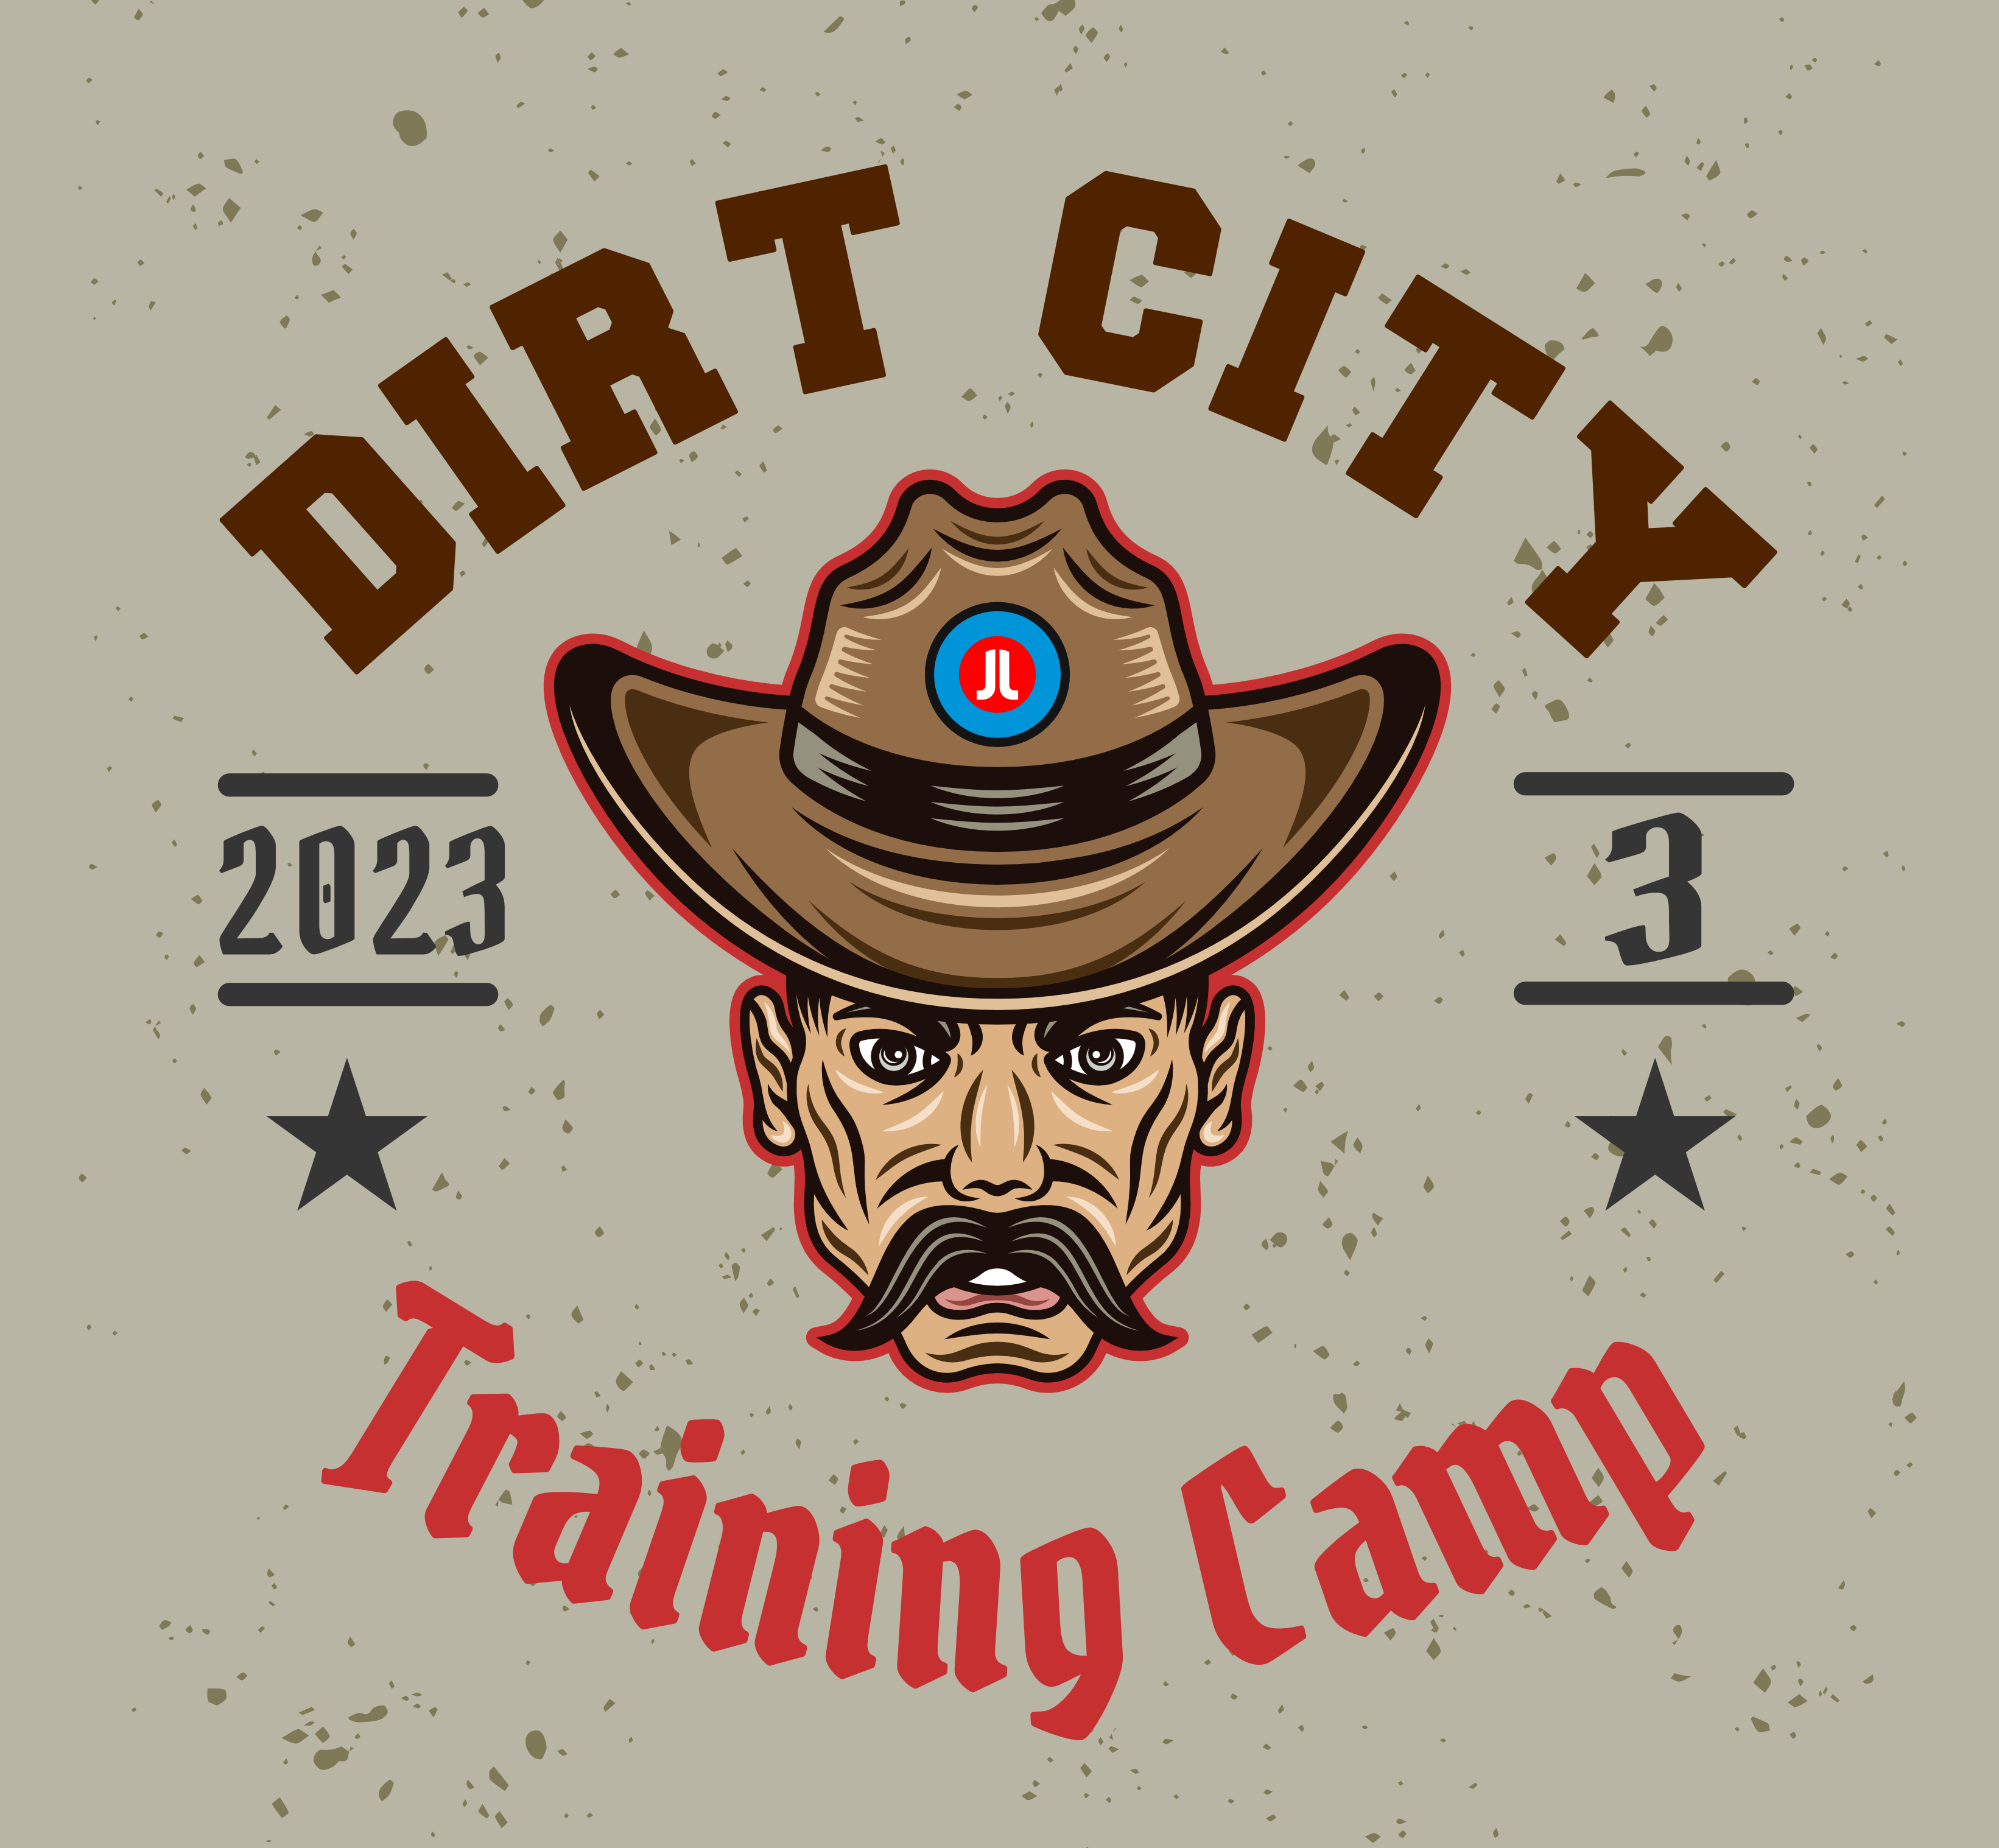 DIRT CITY 3 TRAINING CAMP TICKET FOR KIDS